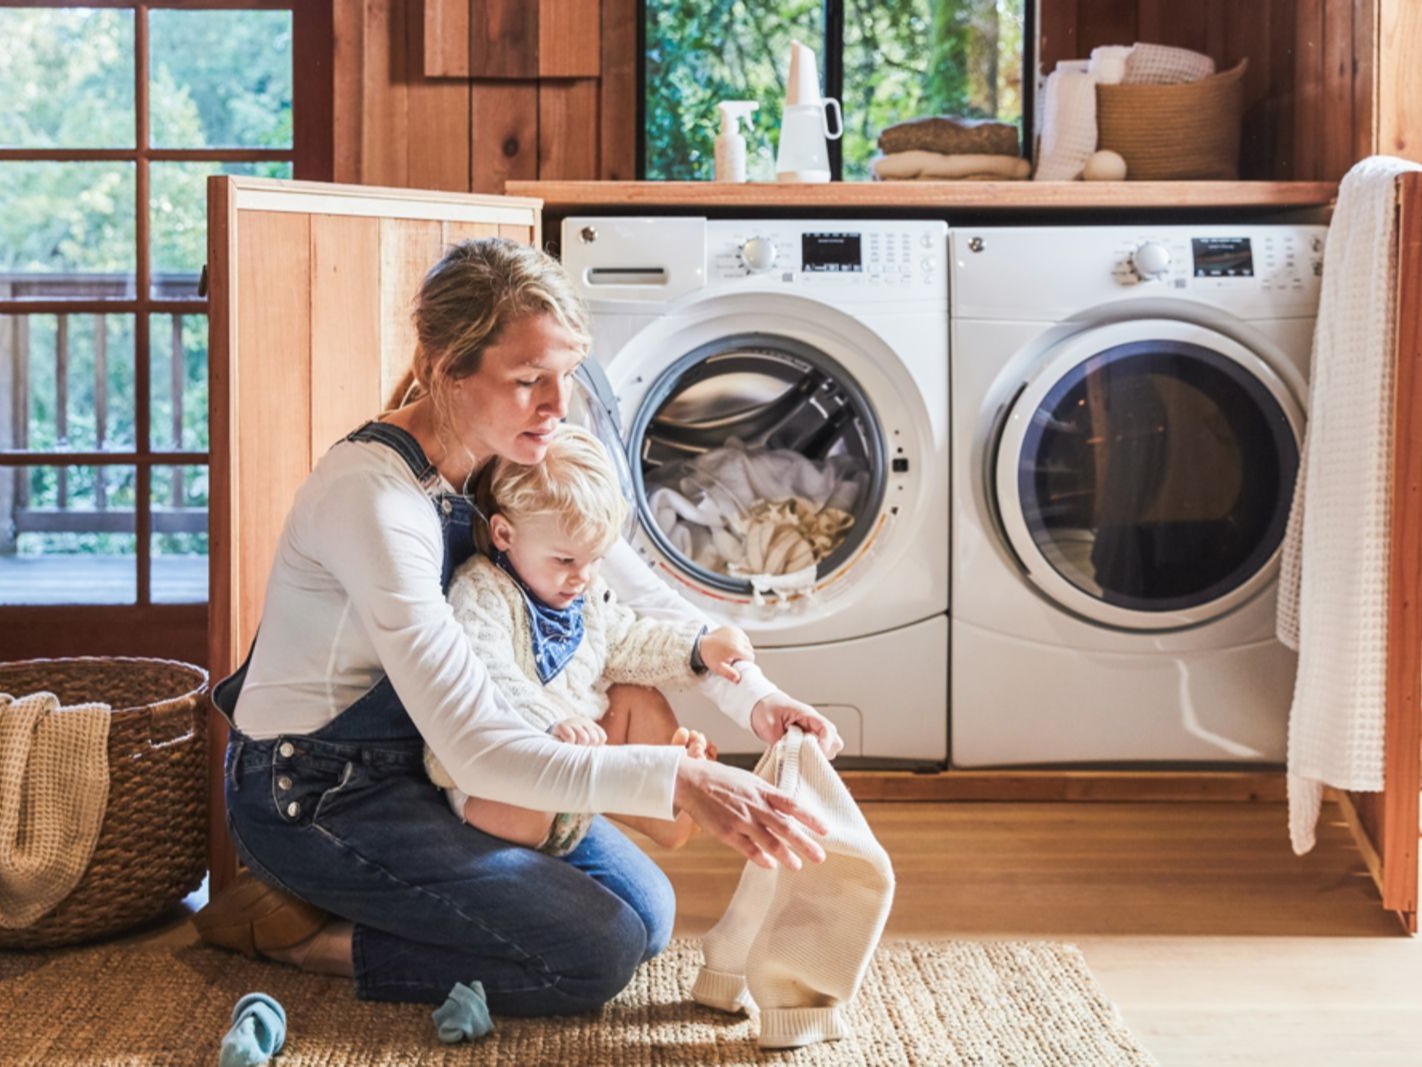 Image of a woman and a child sitting by a washer and a dryer